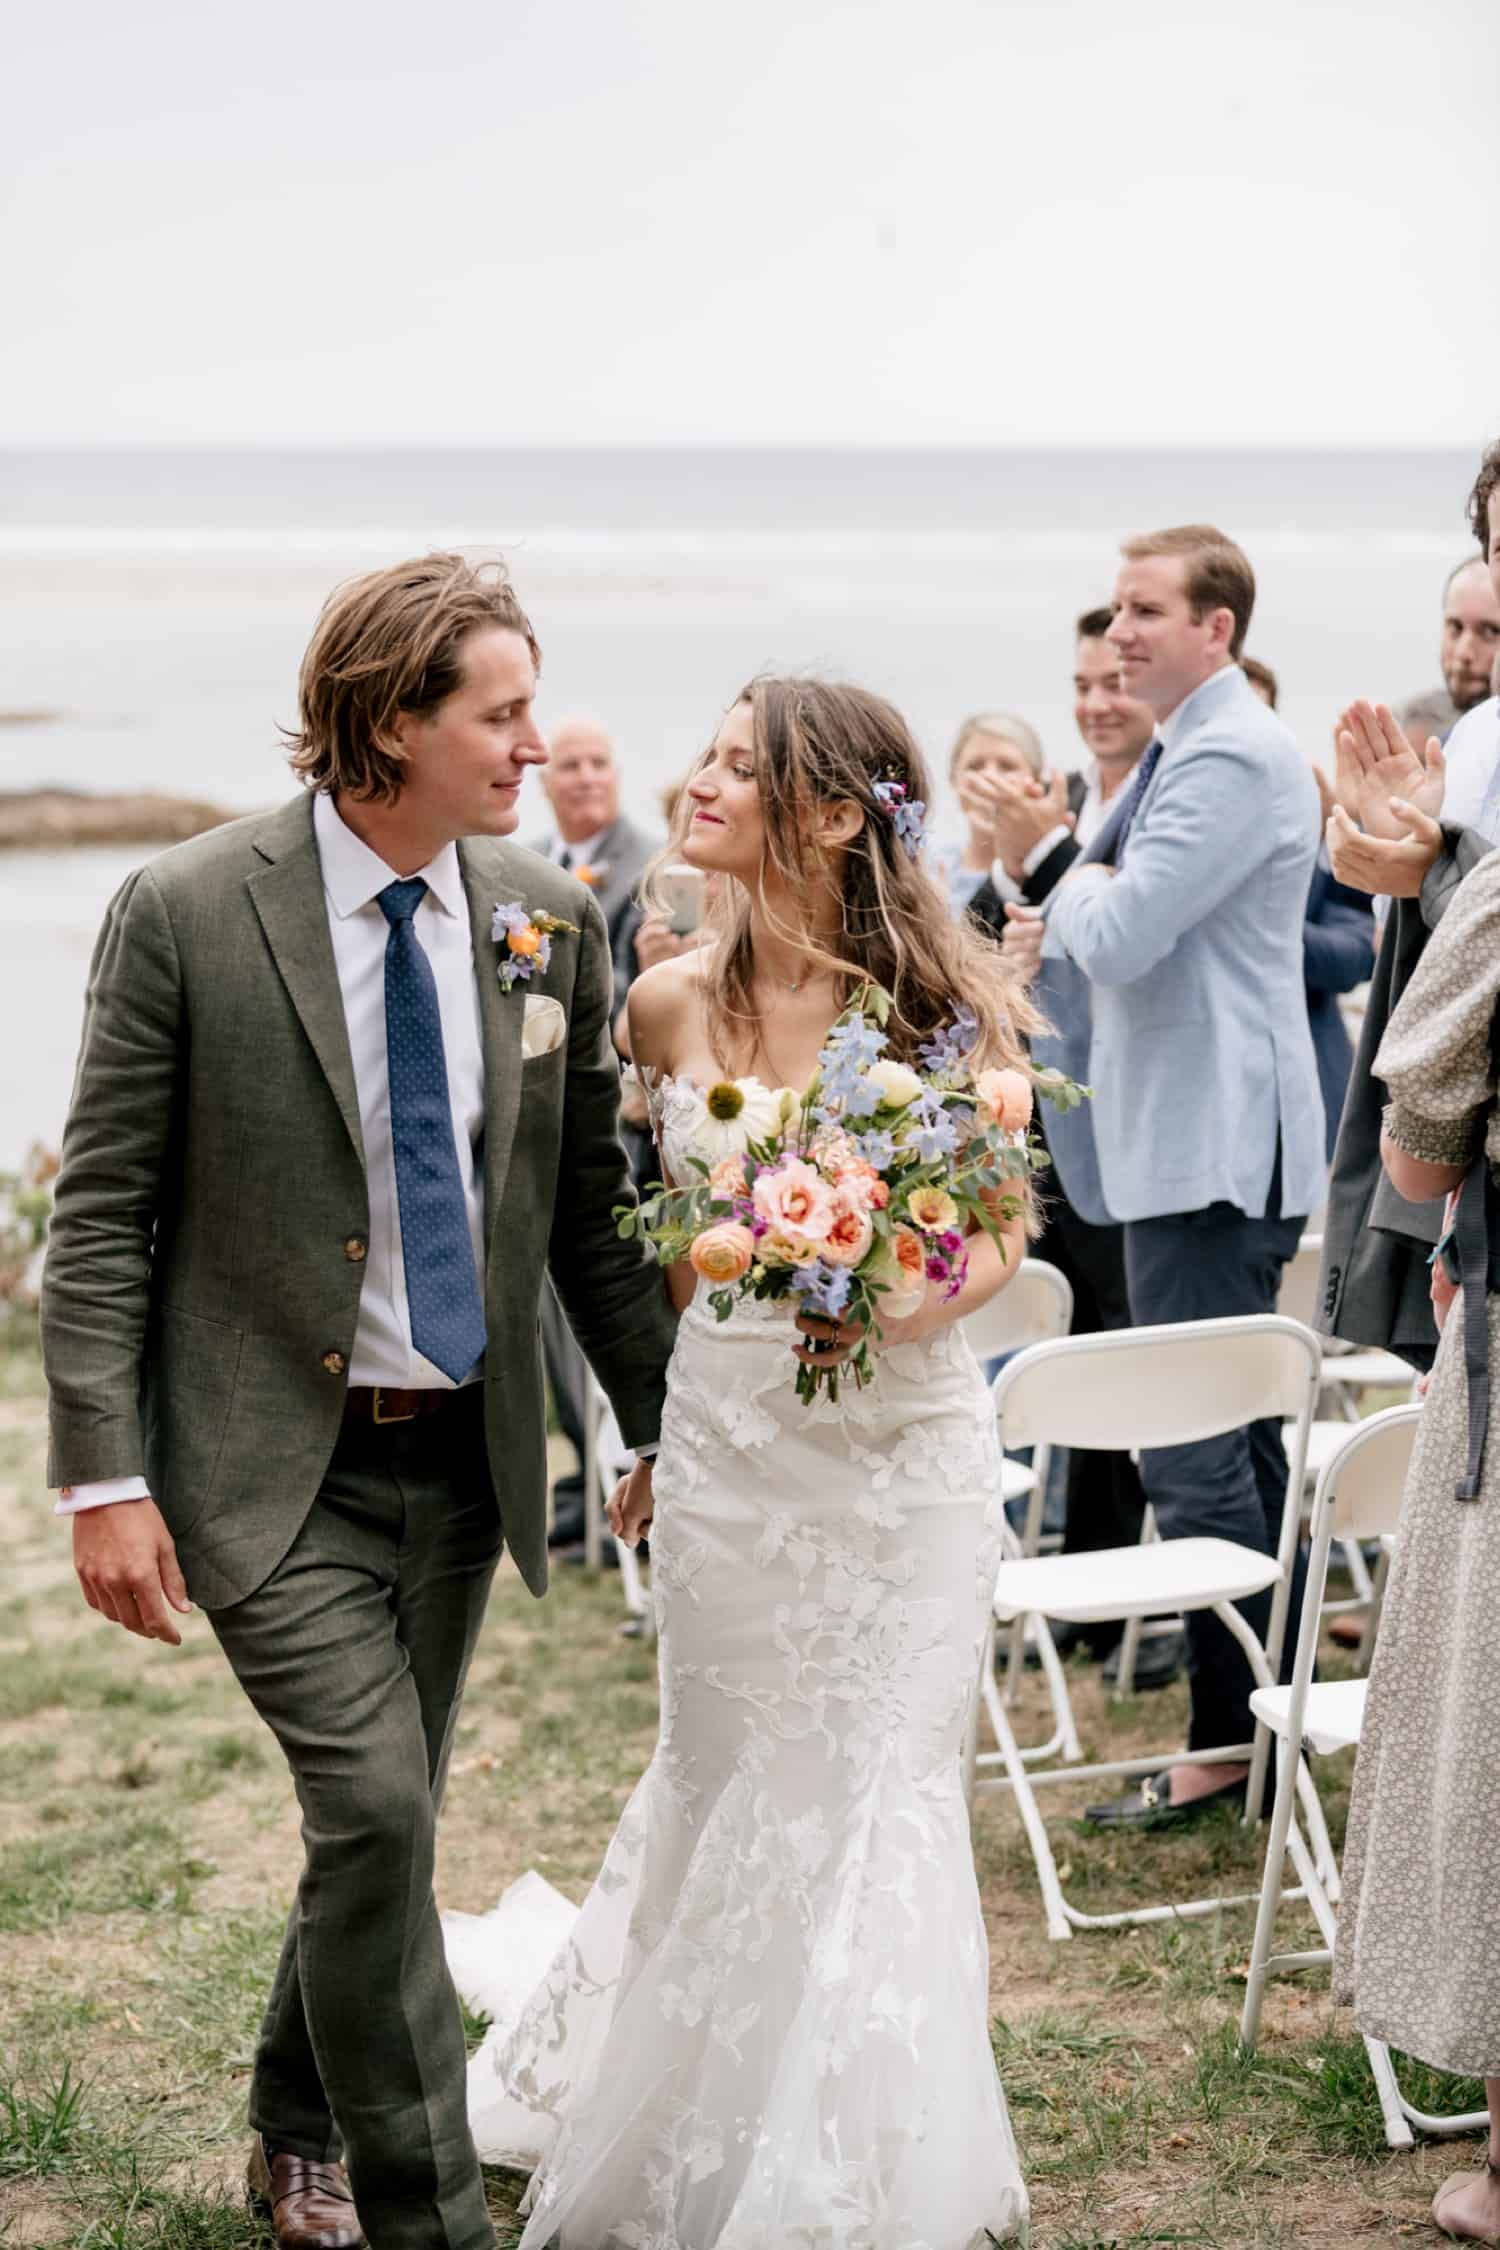 Mid-coast Maine wedding at Small Point Club. Film Wedding Photography by Maine Wedding Photographers the Light and Color.